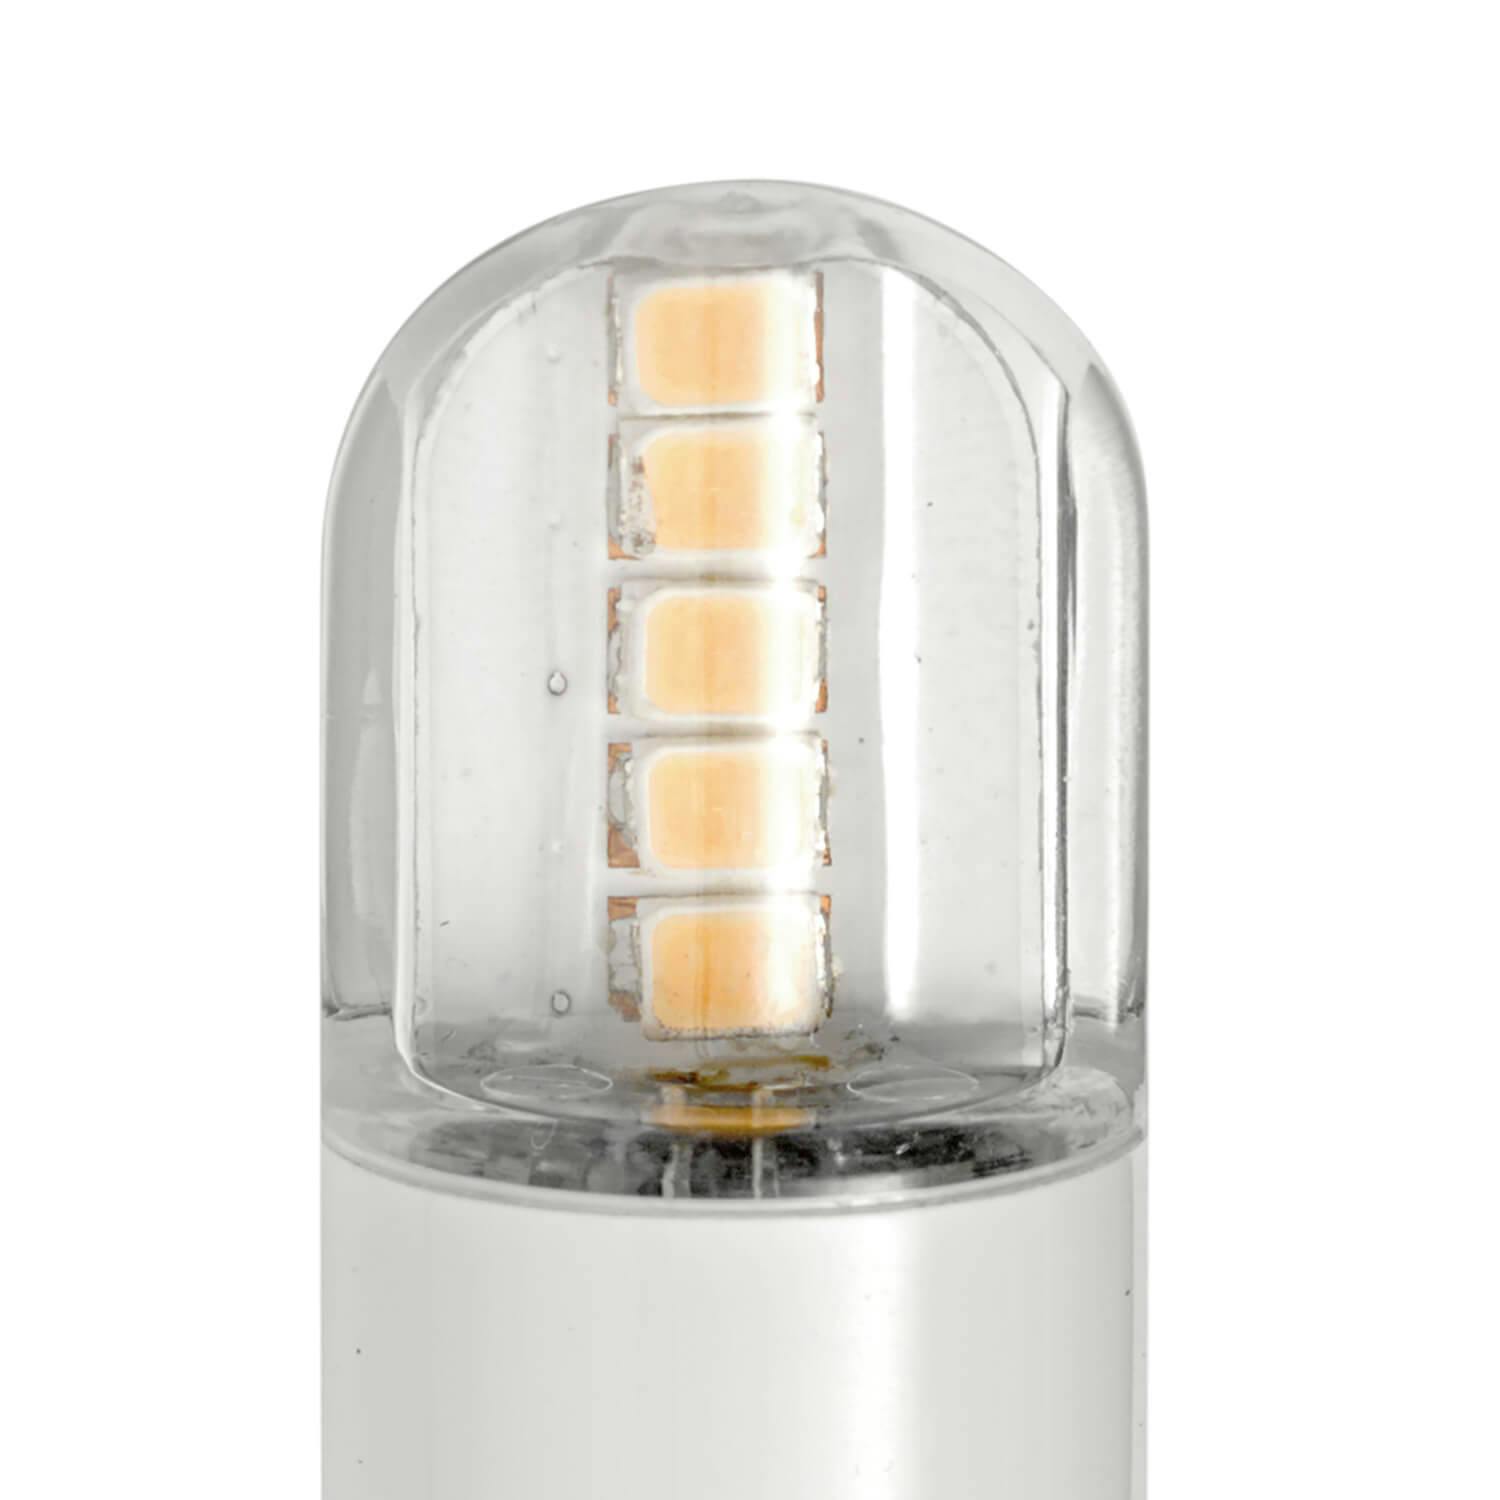 Contractor LED Lamps 2700K T5 230LM 300Deg Omni-Directional on a white background